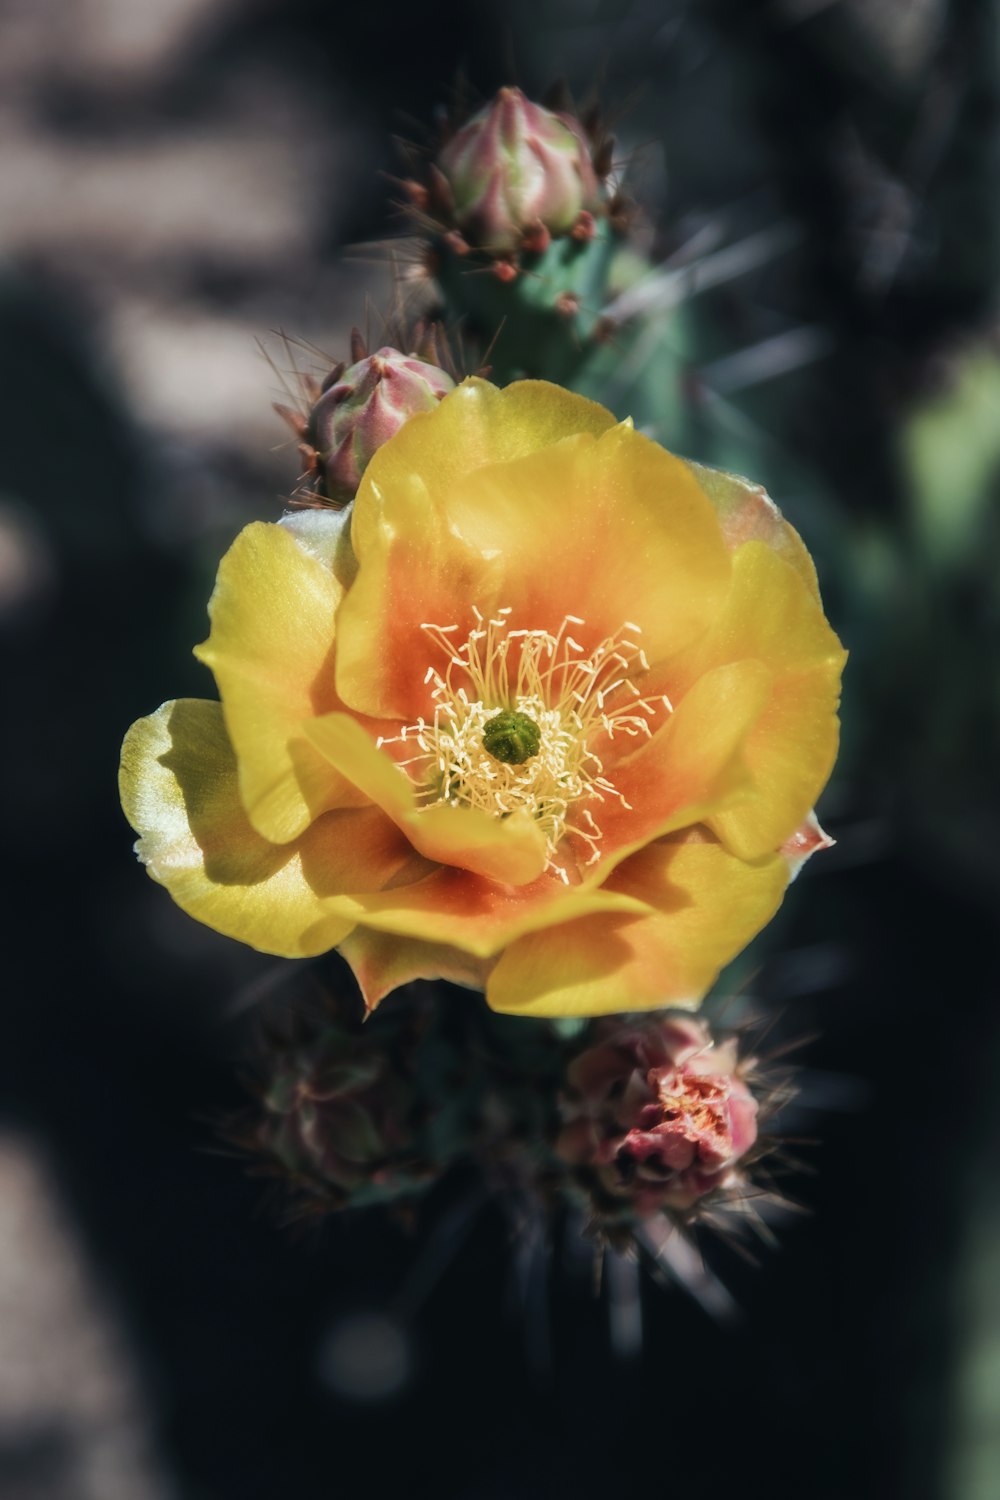 a close up of a yellow flower on a cactus